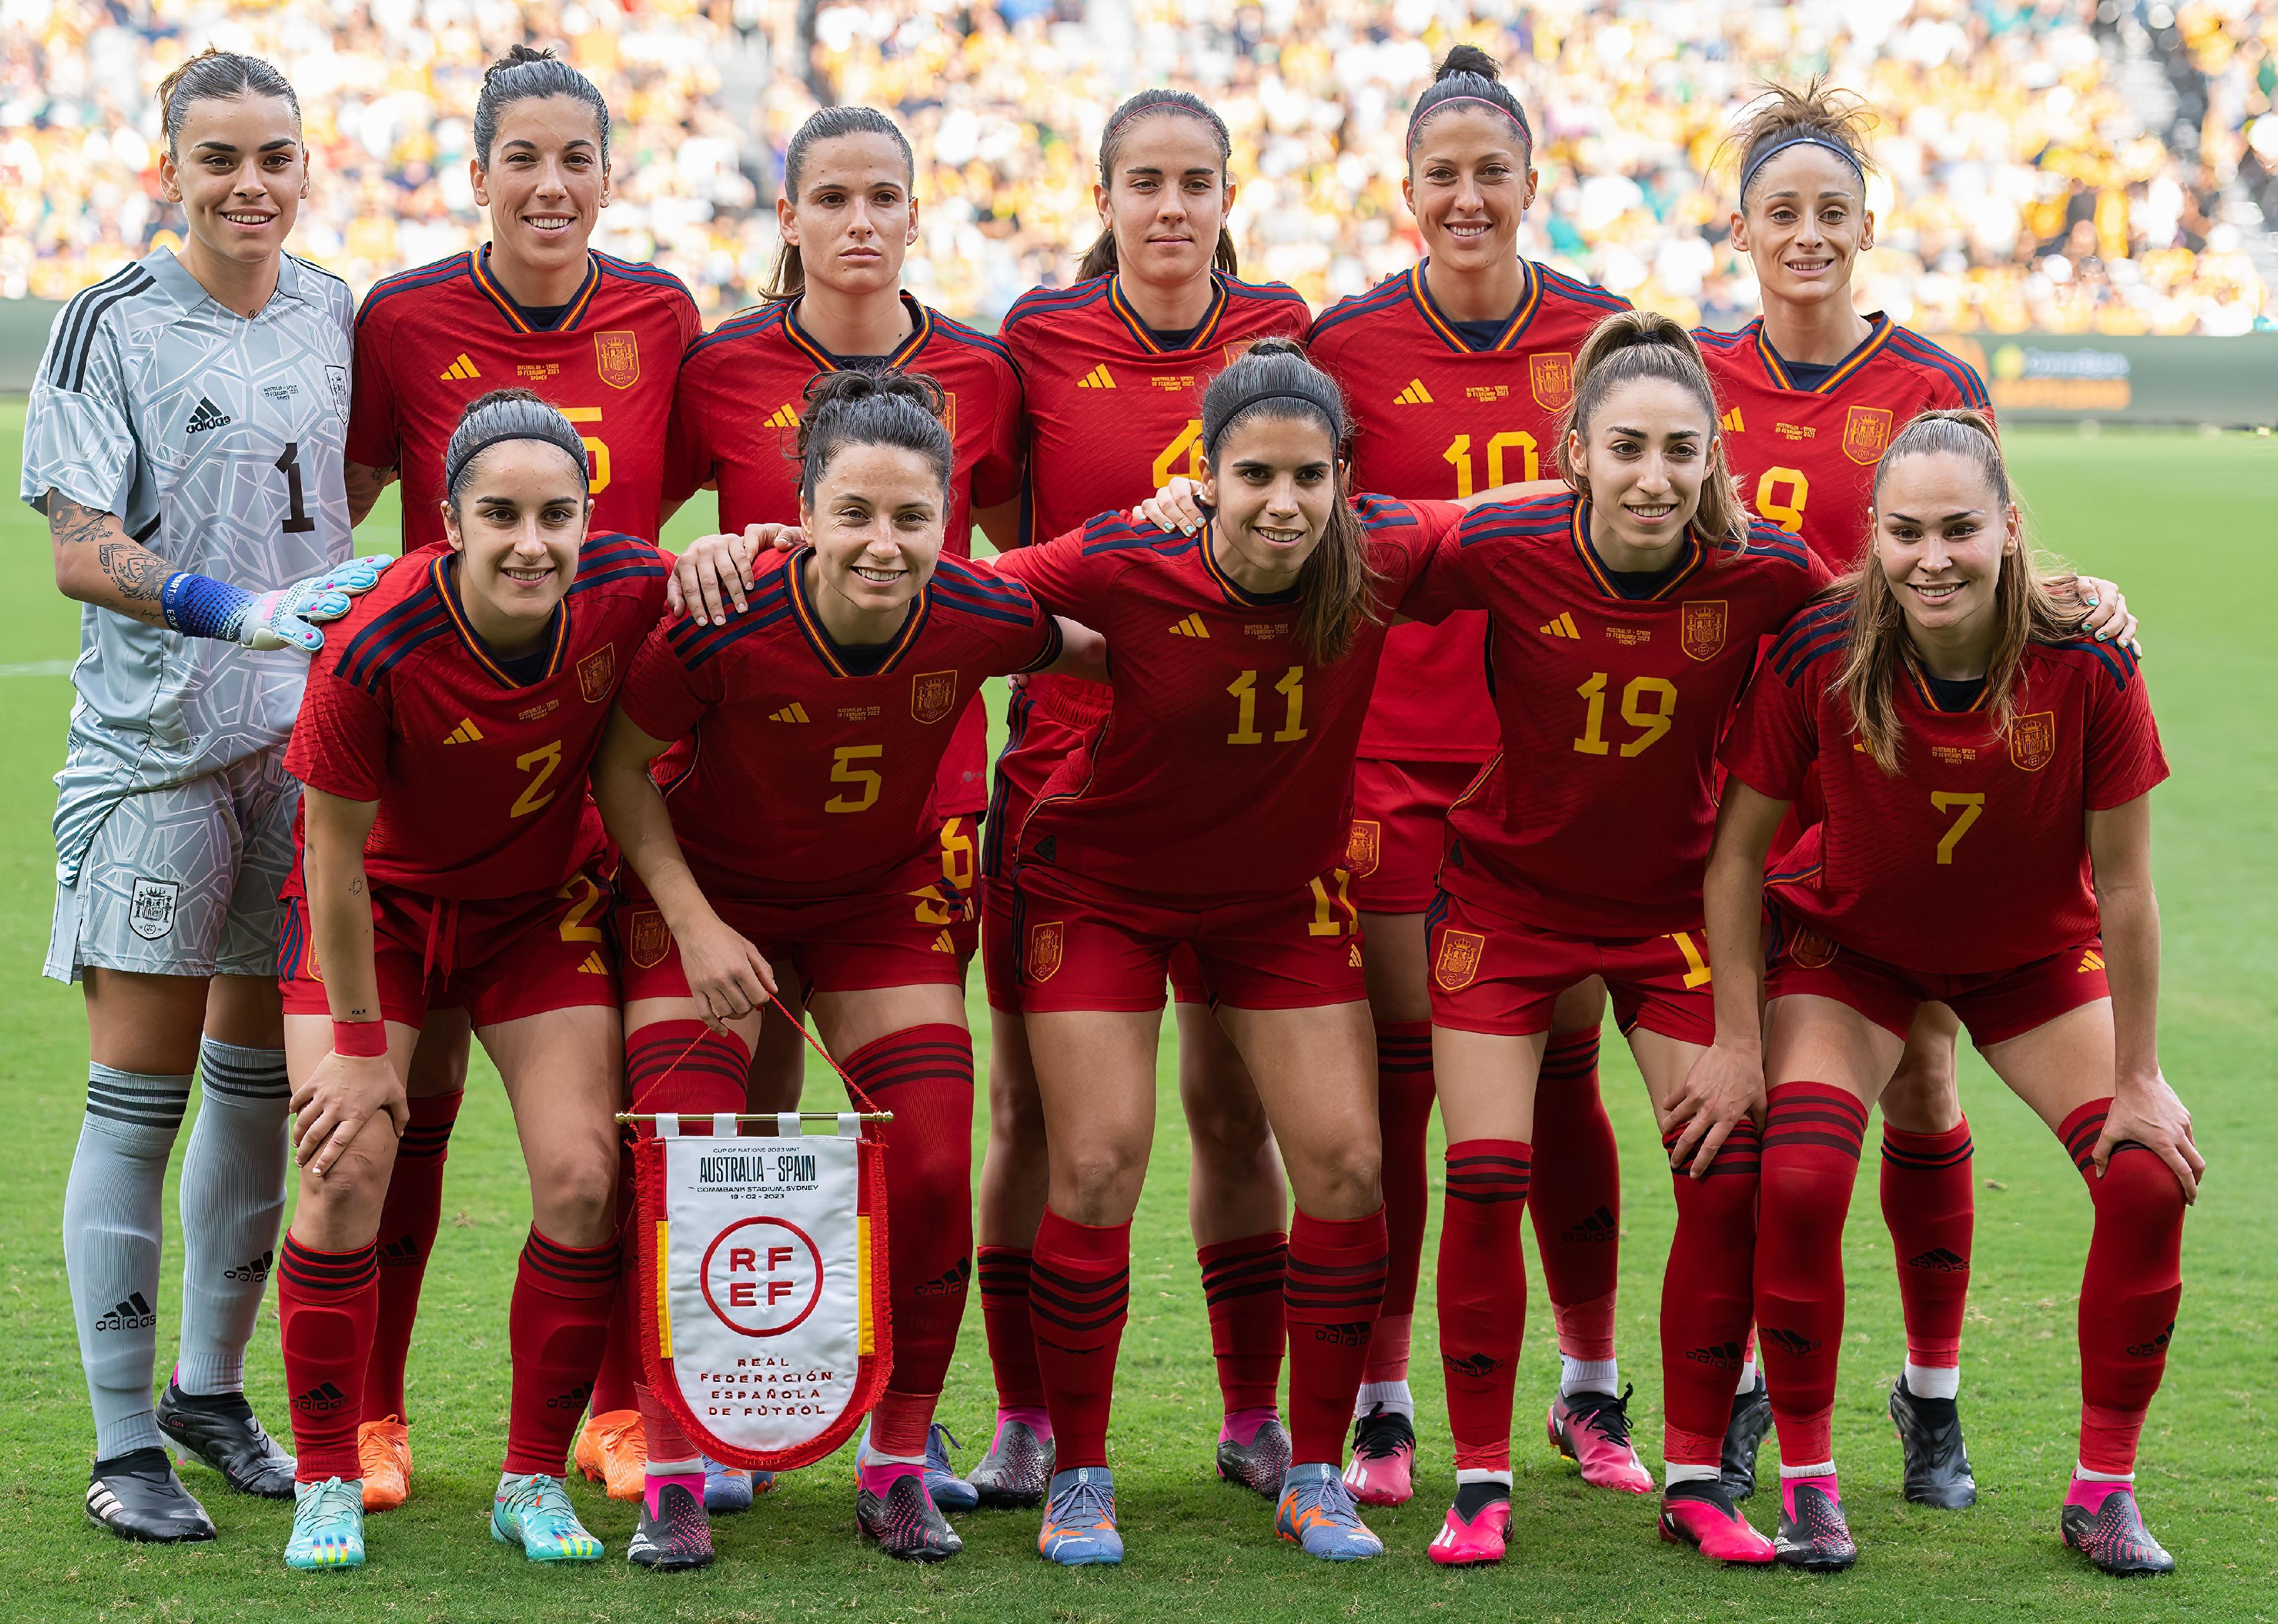 Spain team players line up for official team photo before the play in the Cup of Nations match.